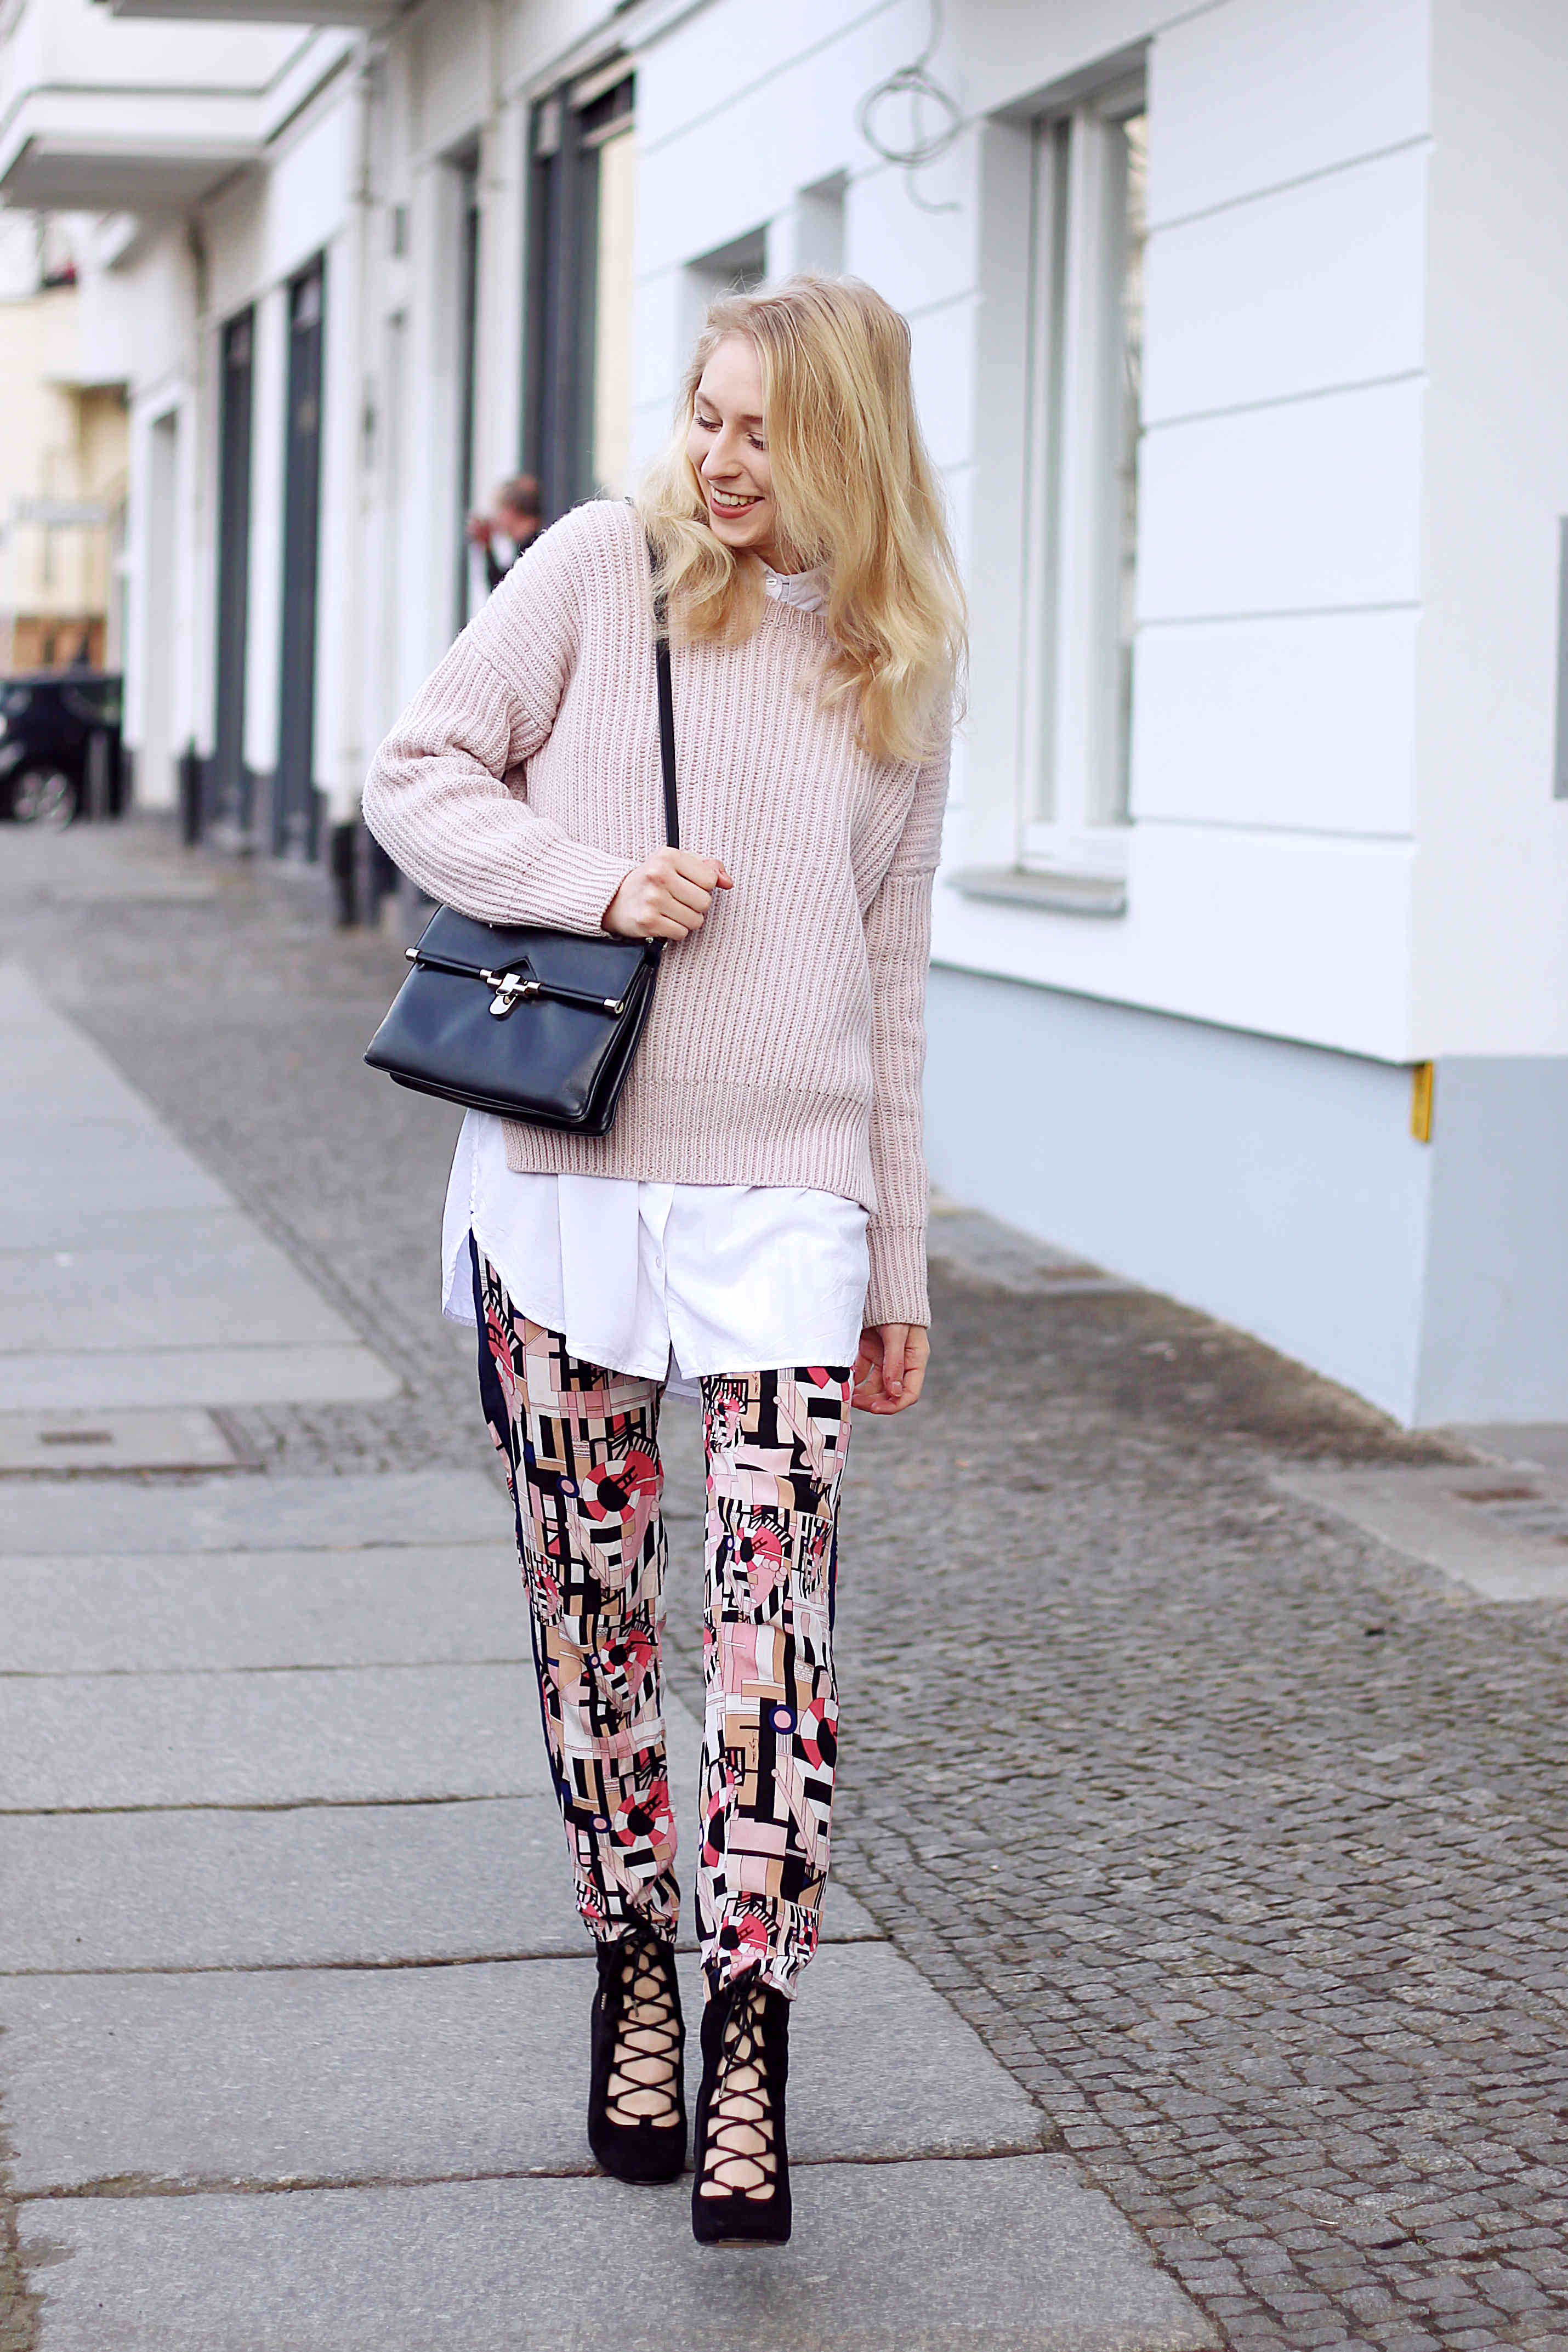 Pastel pink outfit